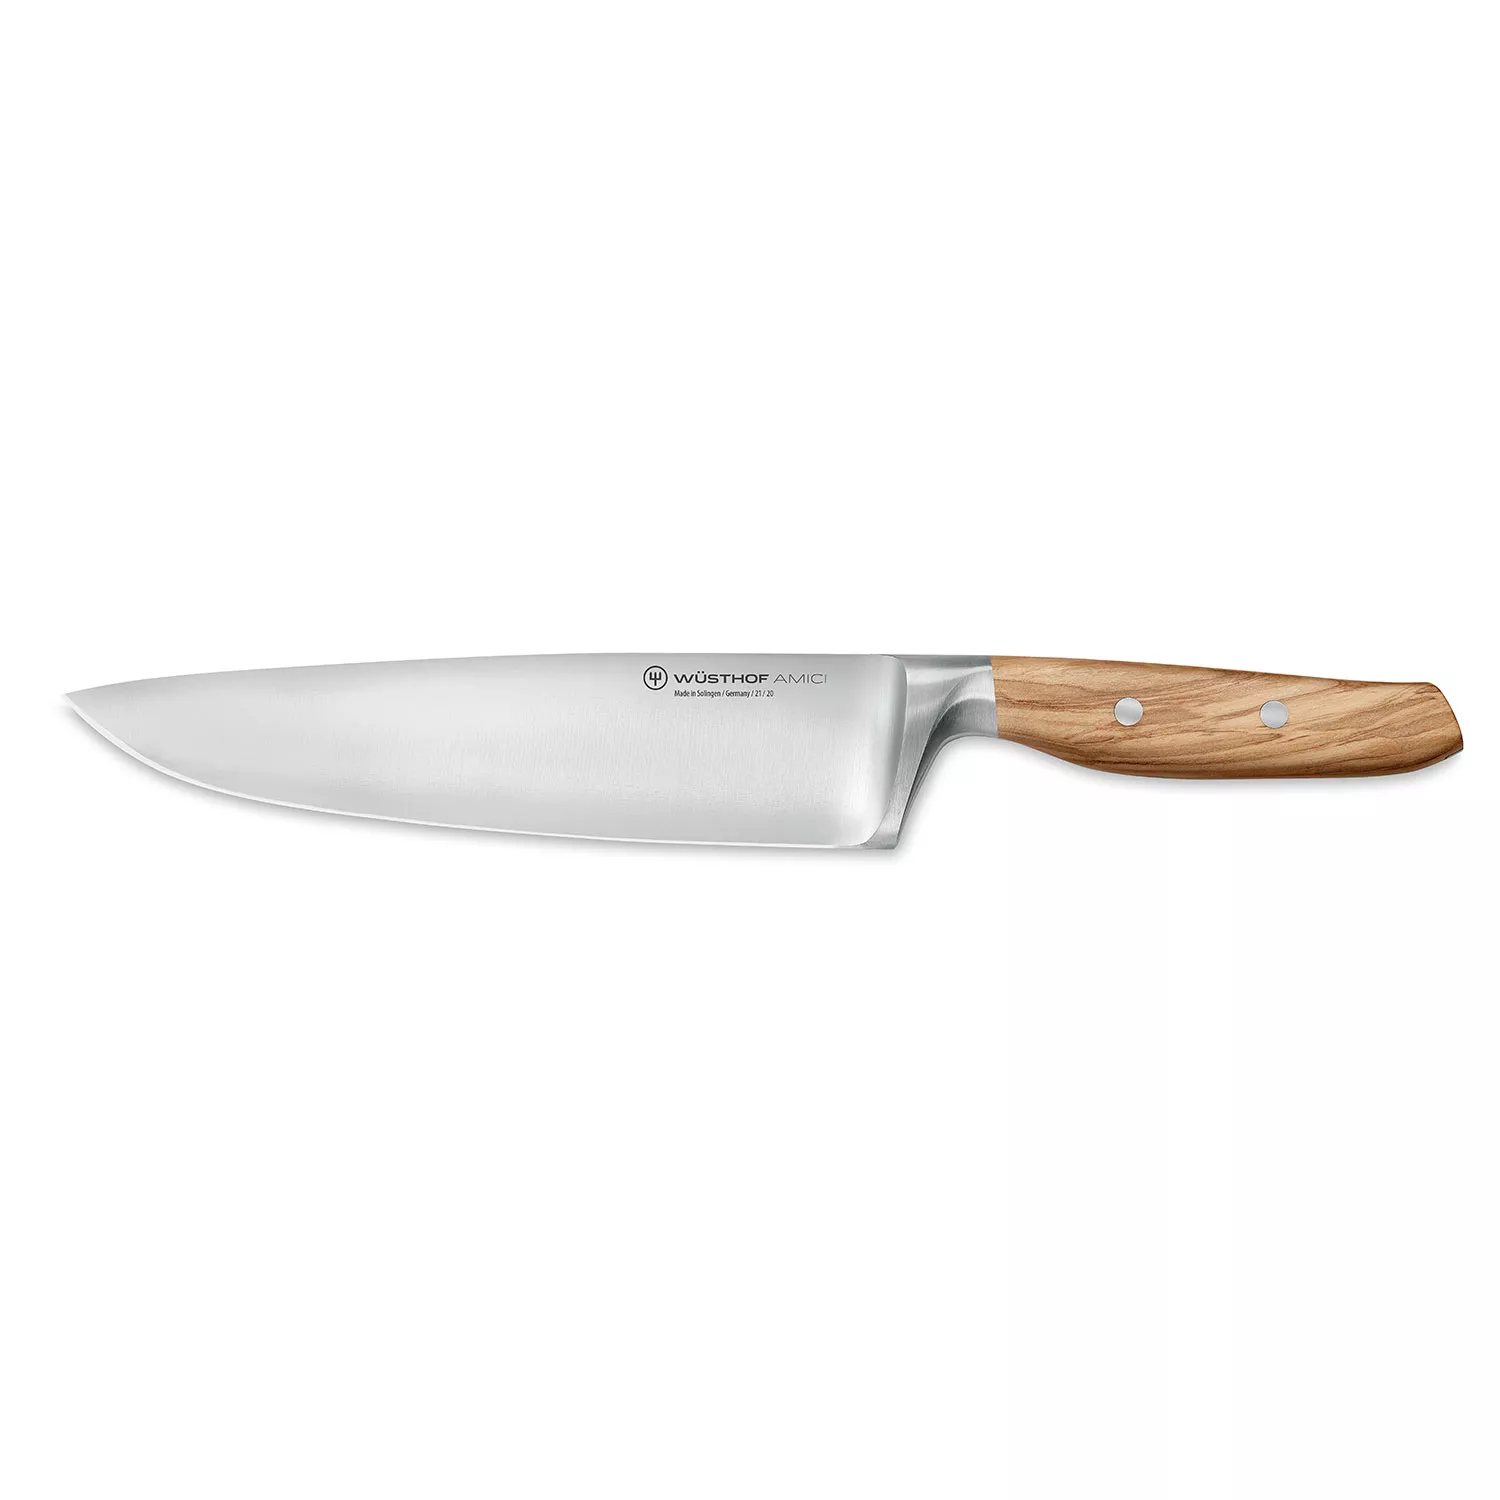 Buy a High-Quality German Steel Professional Chef Knife, Order the CLASSIC  6 Chef Knife at SCANPAN USA